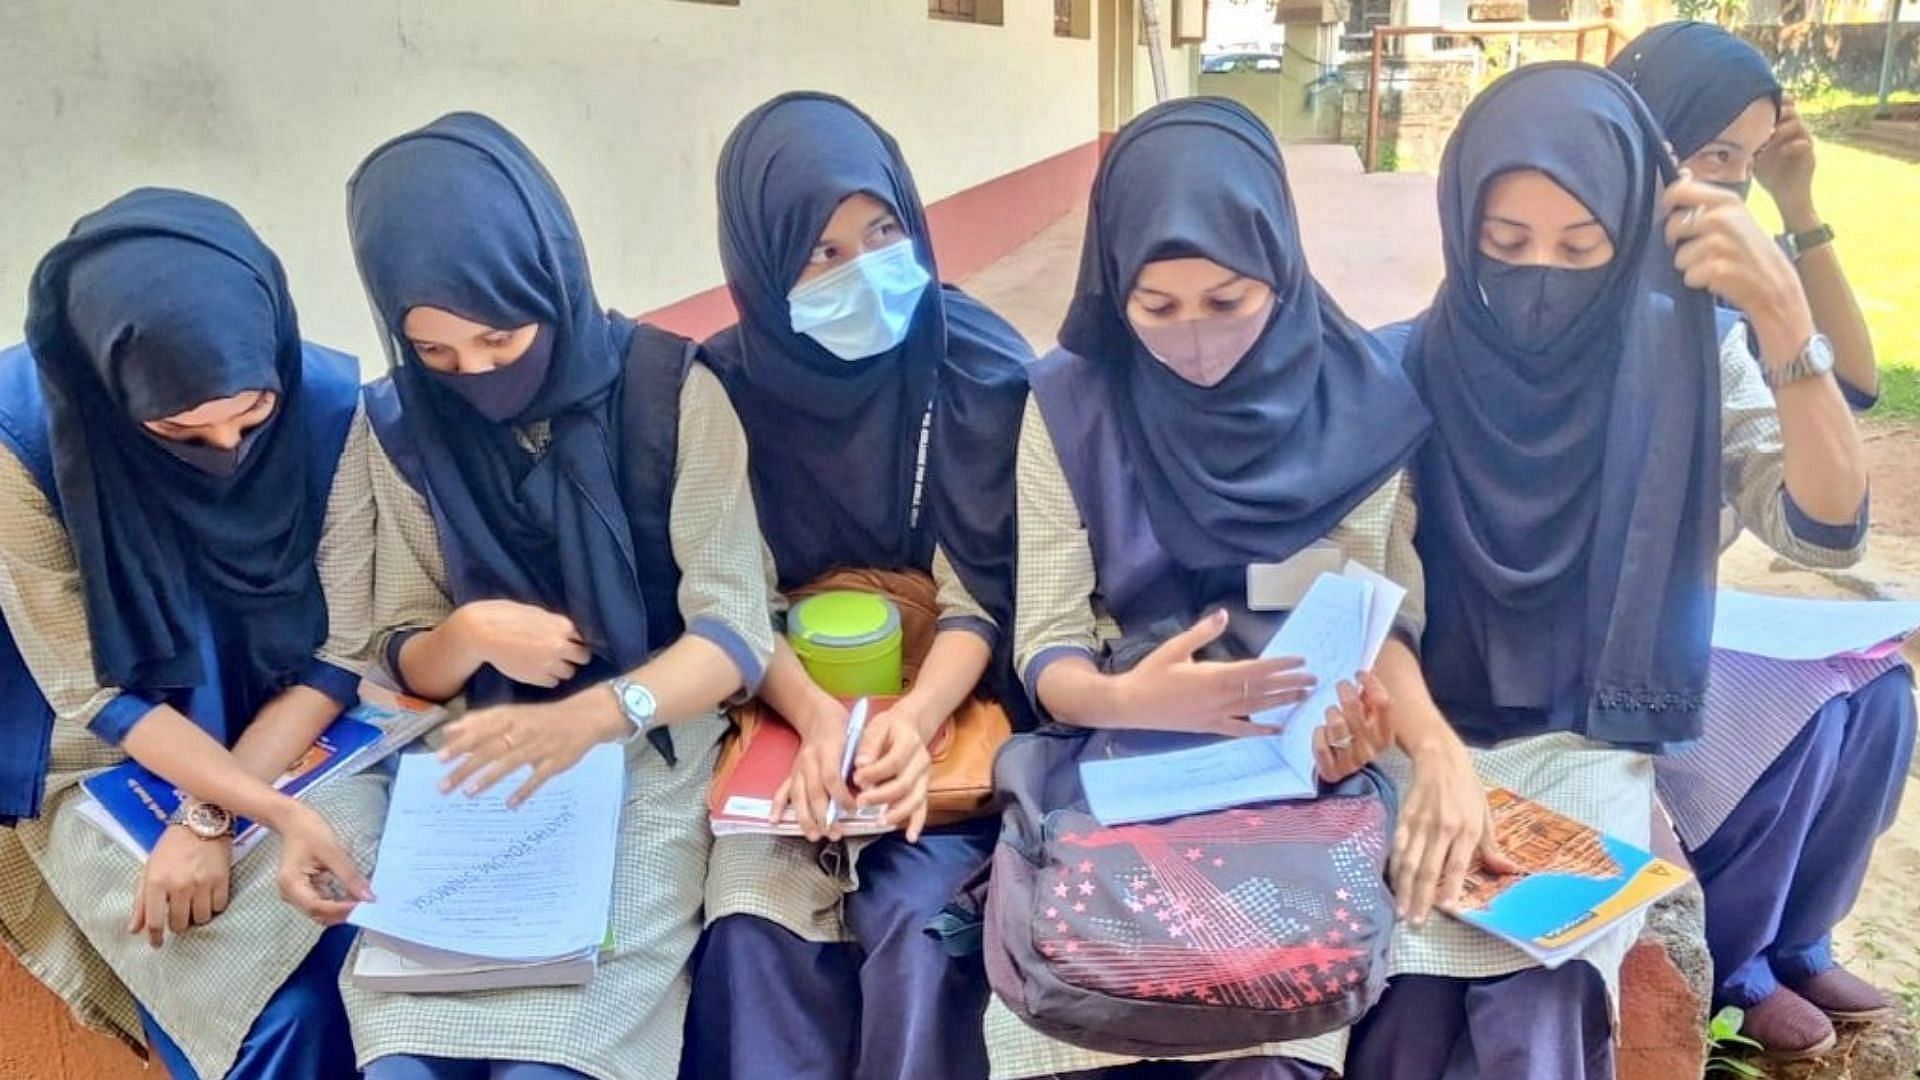 <div class="paragraphs"><p>The Karnataka High Court interim order to restrain students from wearing hijab or any religious attire in educational institutes till the matter is pending with the court has been challenged in the Supreme Court on Friday, 11 February.</p></div>